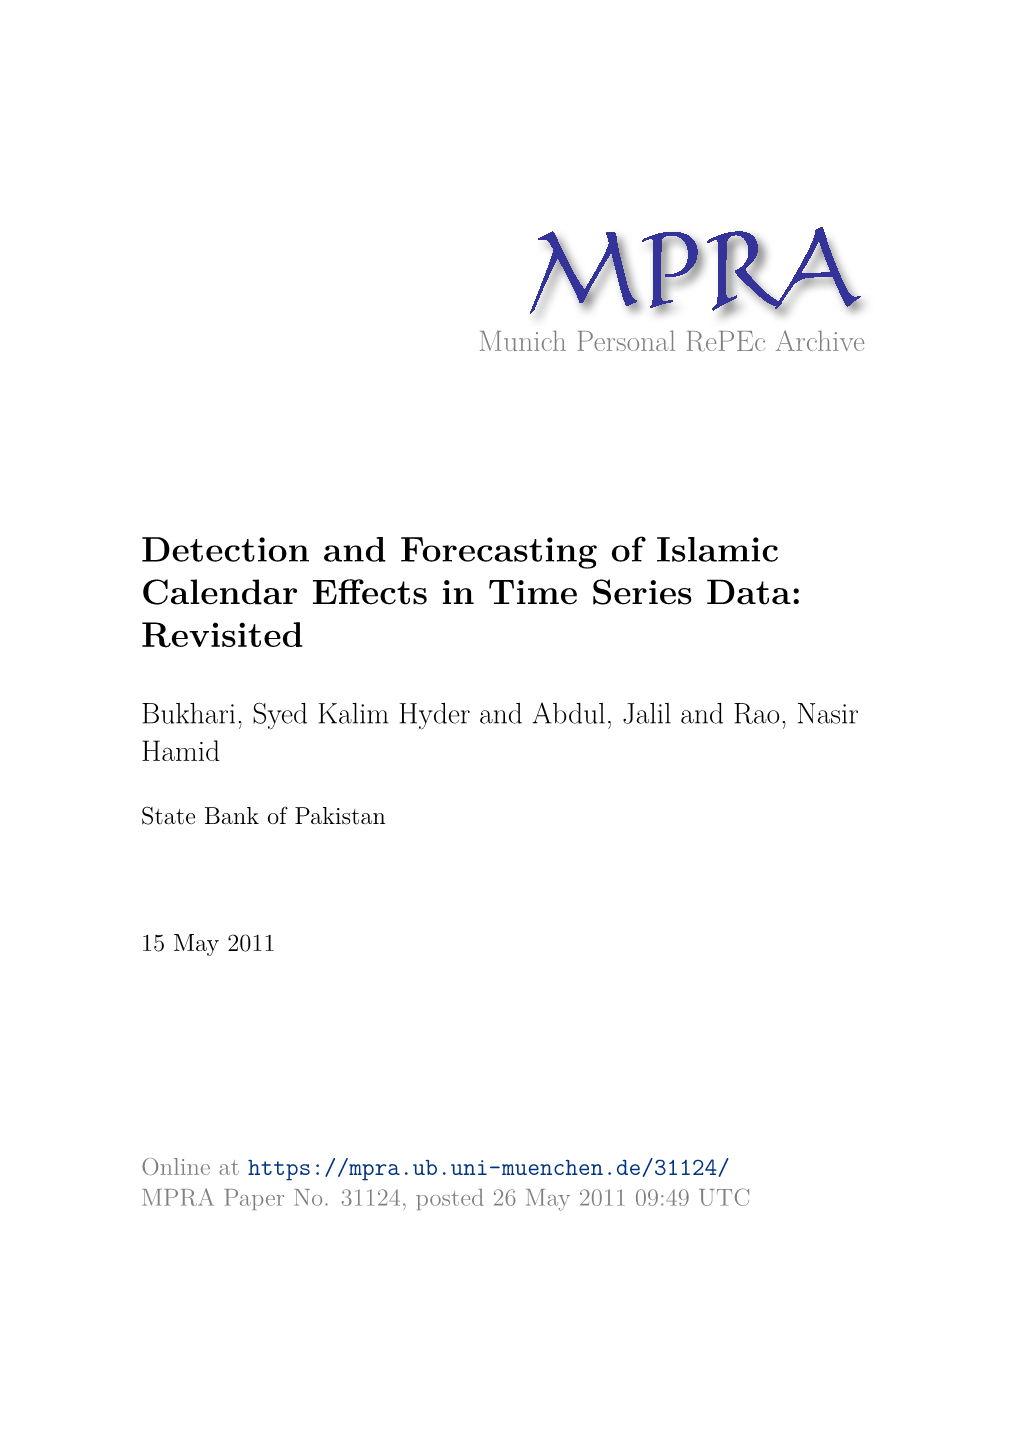 Detection and Forecasting of Islamic Calendar Effects in Time Series Data: Revisited